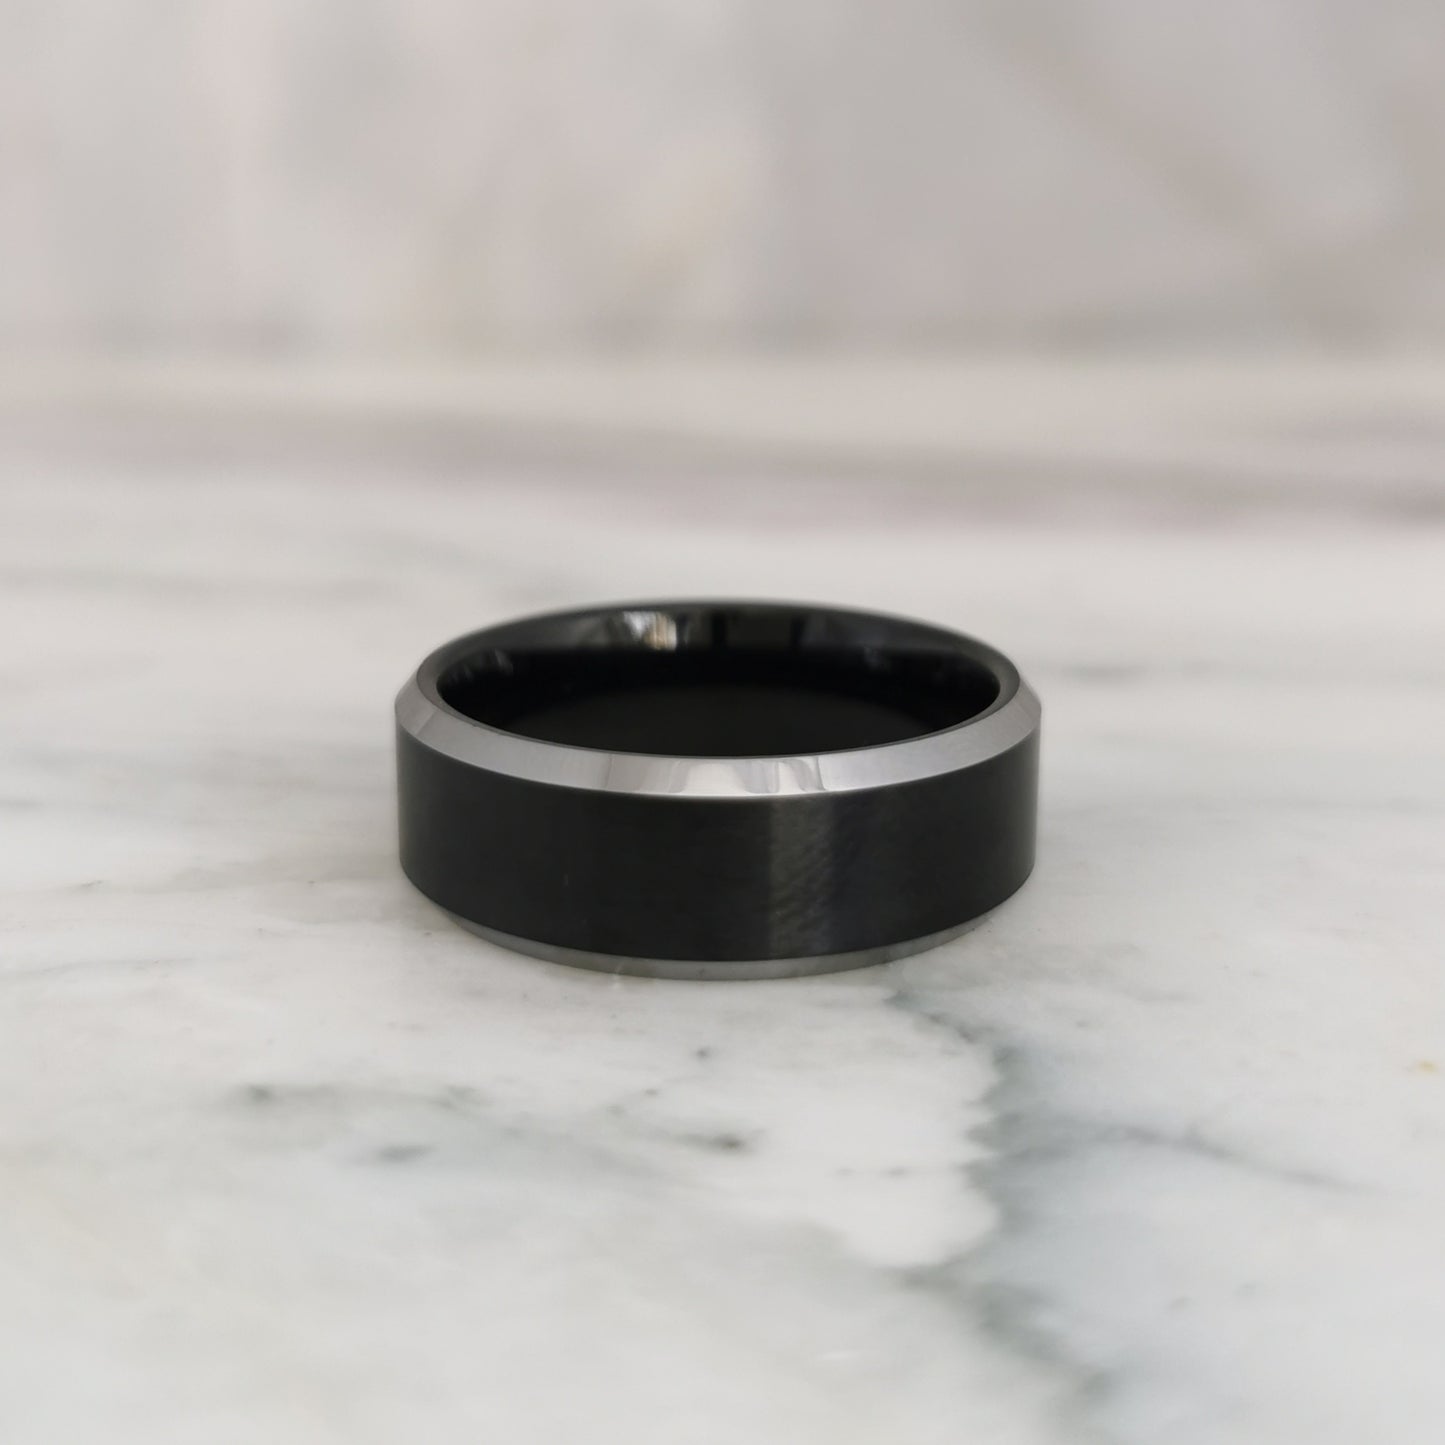 8mm Matt Black Tungsten Ring with Polished Bevelled Edges